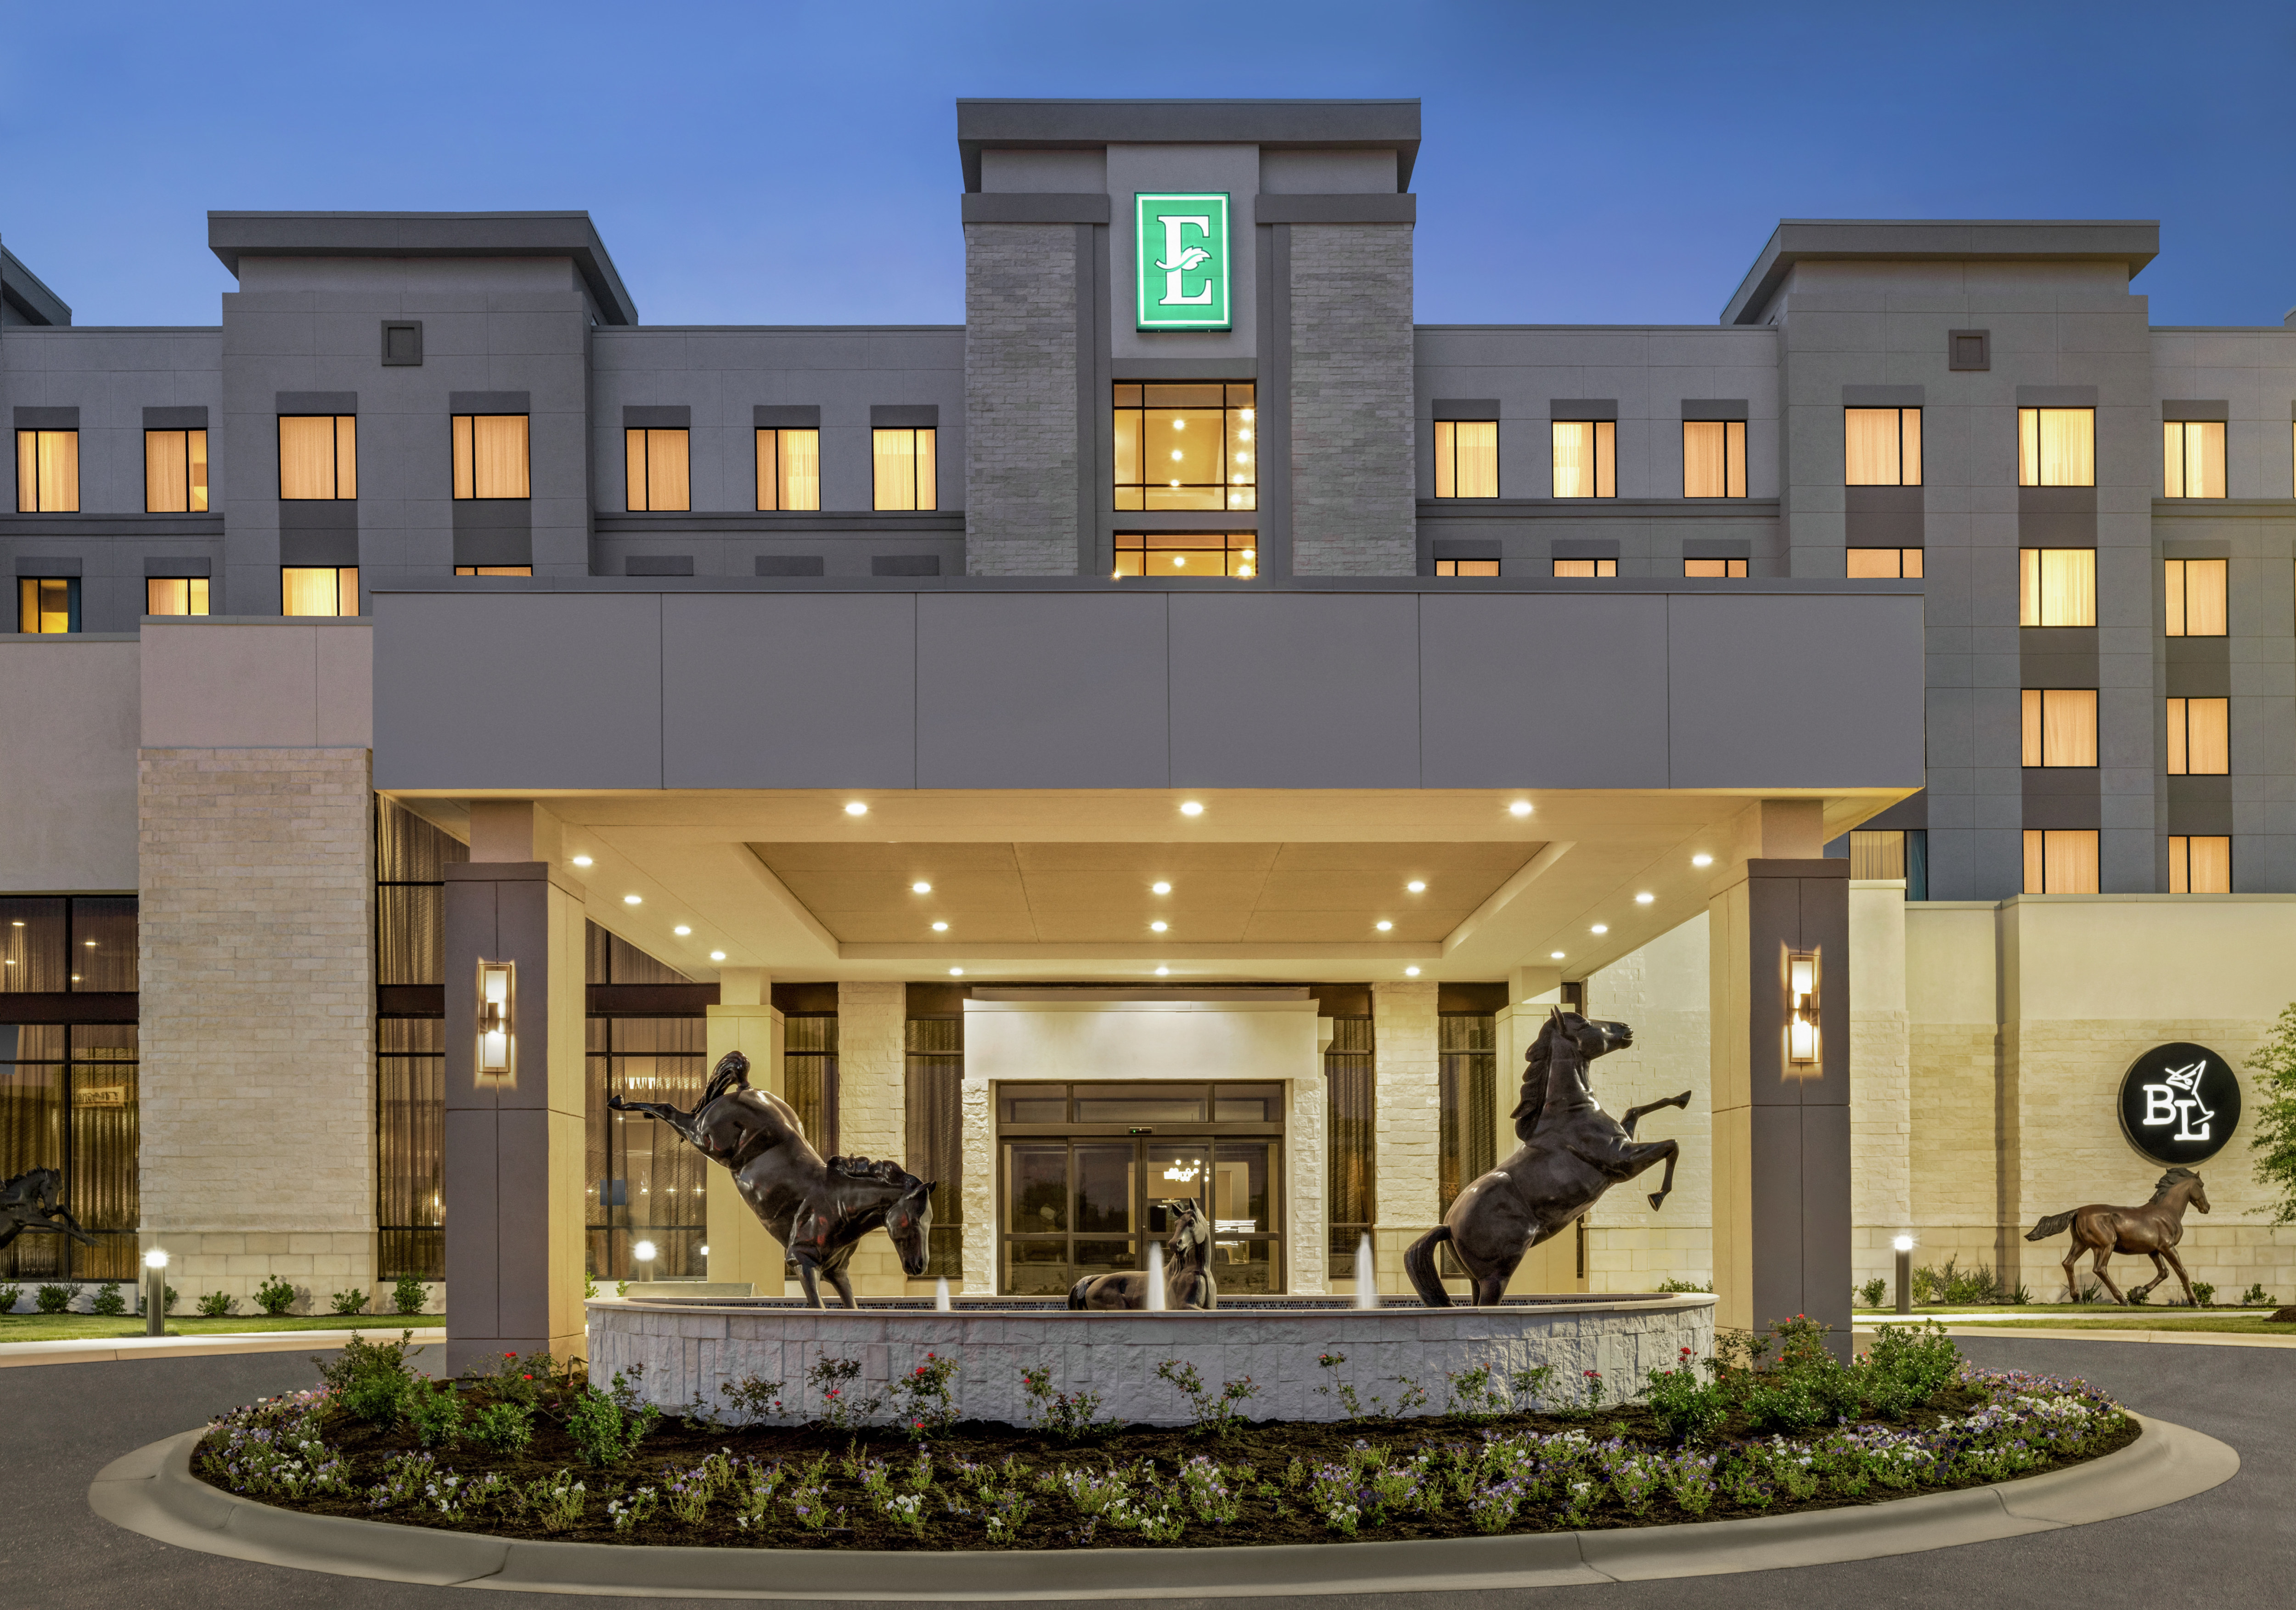 Modern Embassy Suites hotel exterior featuring porte cochere, stunning horse statues, and glowing guestroom windows.